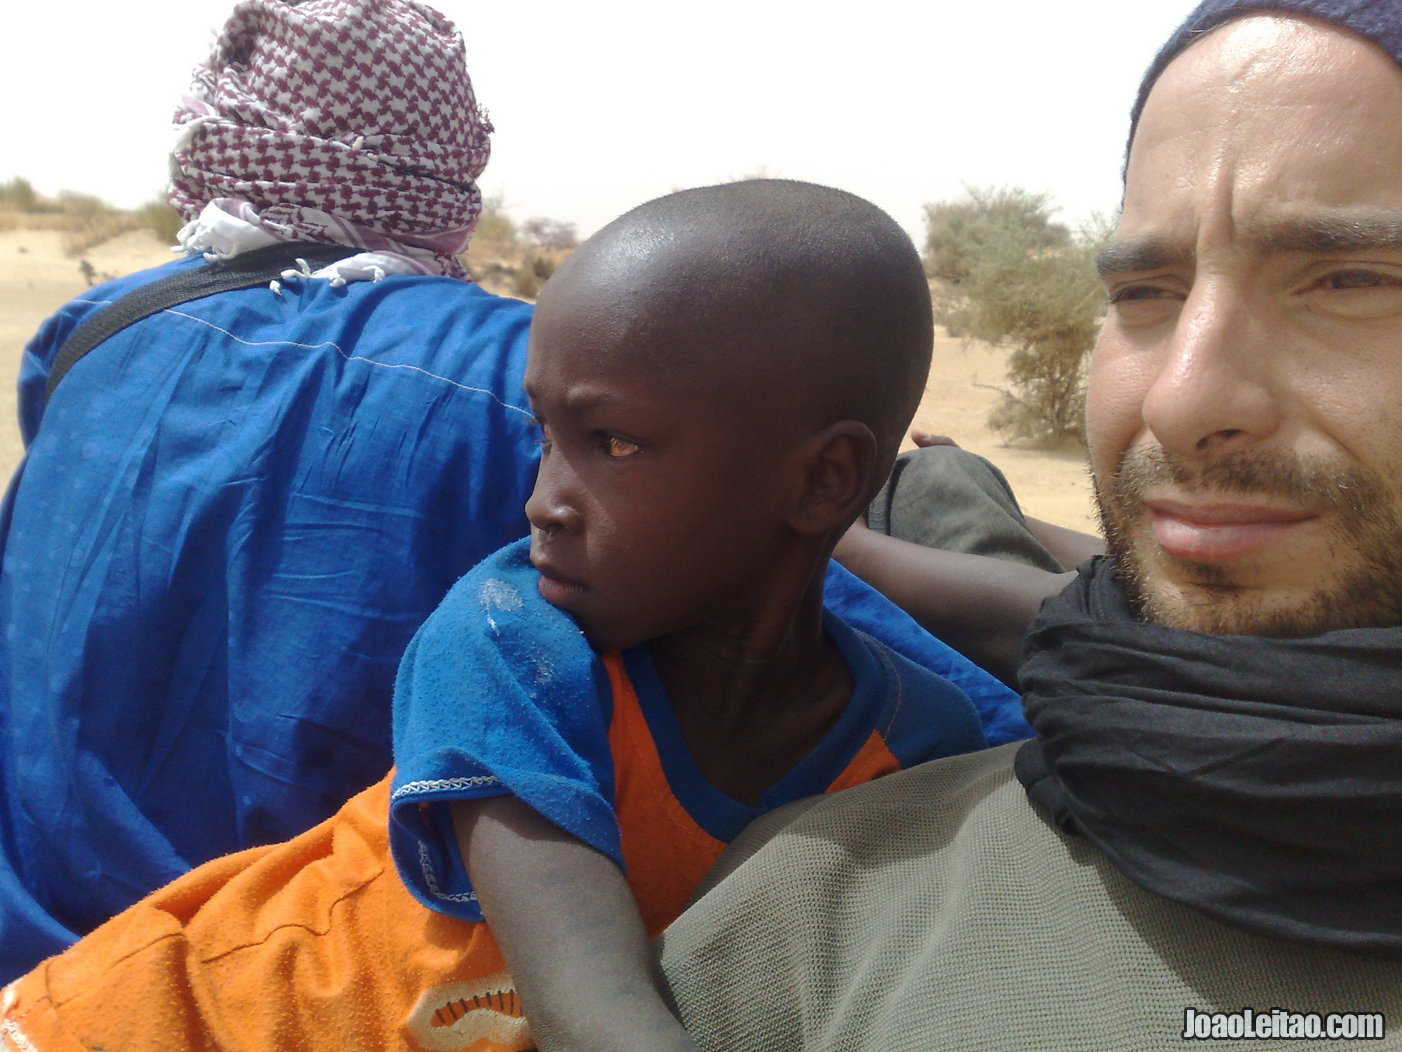 MY NEW FRIEND ON THE WAY TO TIMBUKTU IN NORTHERN MALI